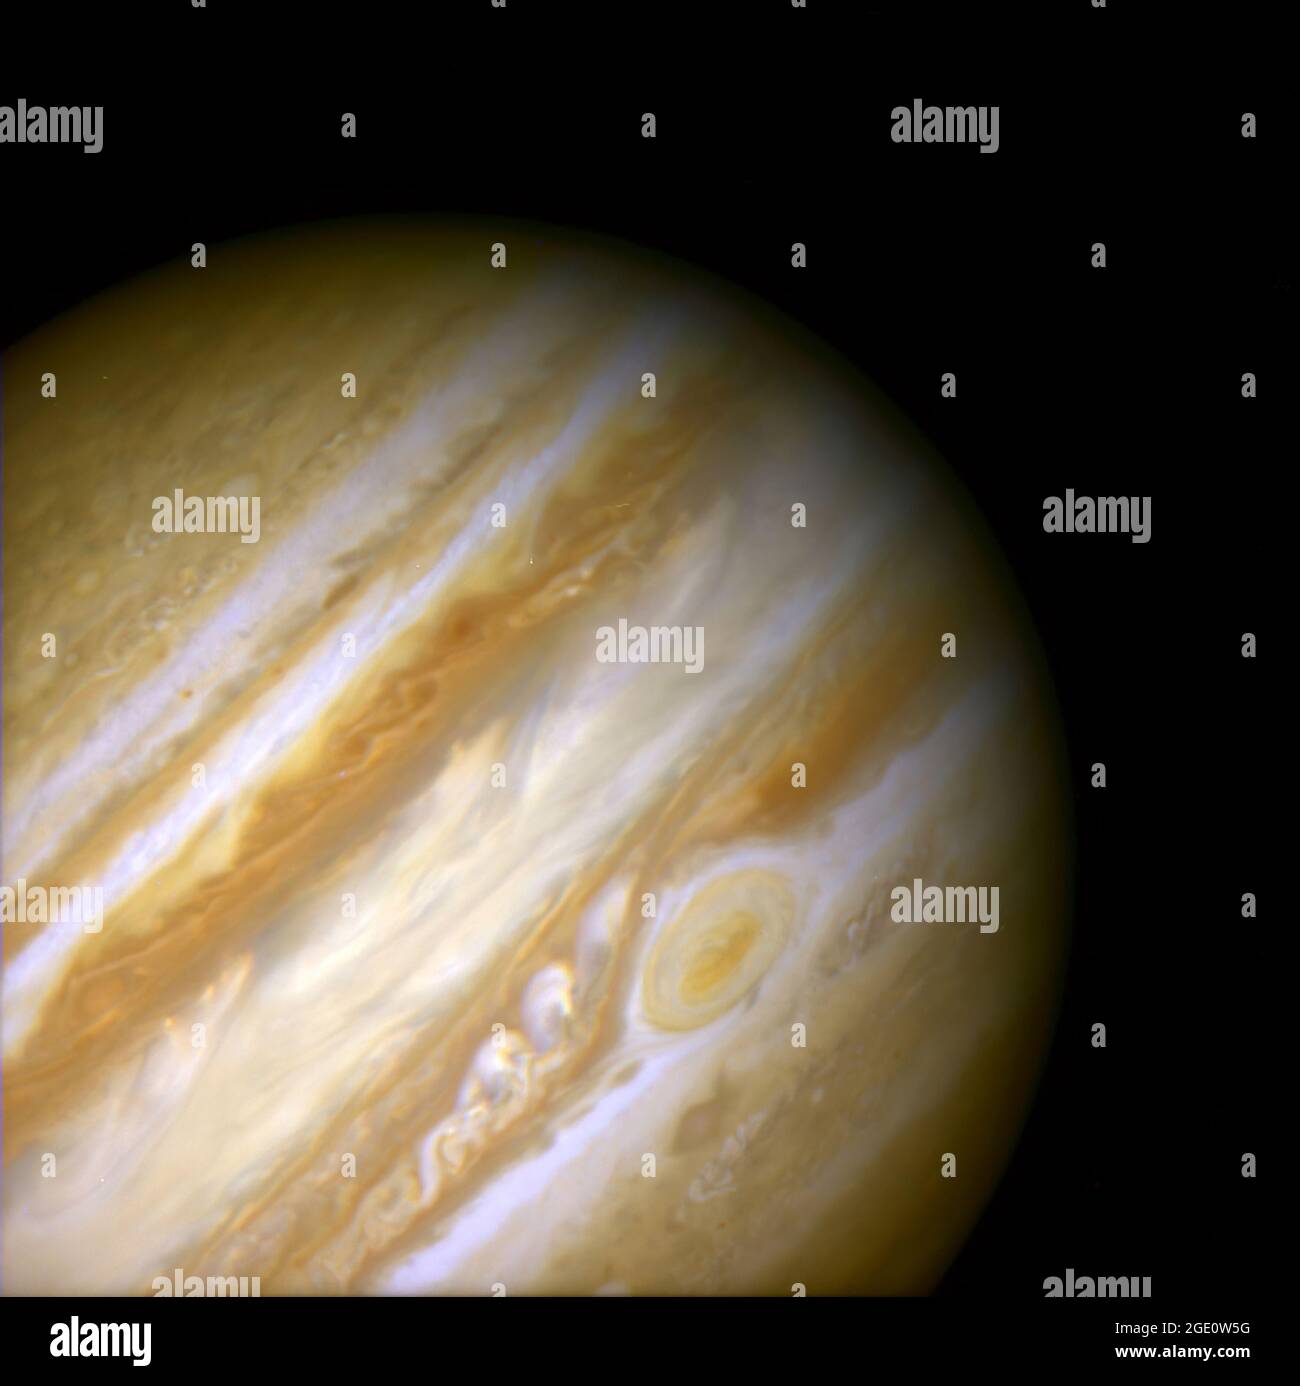 When 17th-century astronomers first turned their telescopes to Jupiter, they noted a conspicuous reddish spot on the giant planet. This Great Red Spot is still present in Jupiter's atmosphere, more than 300 years later. It is now known that it is a vast storm, spinning like a cyclone. Unlike a low-pressure hurricane in the Caribbean Sea, however, the Red Spot rotates in a counterclockwise direction in the southern hemisphere, showing that it is a high-pressure system. Winds inside this Jovian storm reach speeds of about 270 mph. The Red Spot is the largest known storm in the Solar System. With Stock Photo